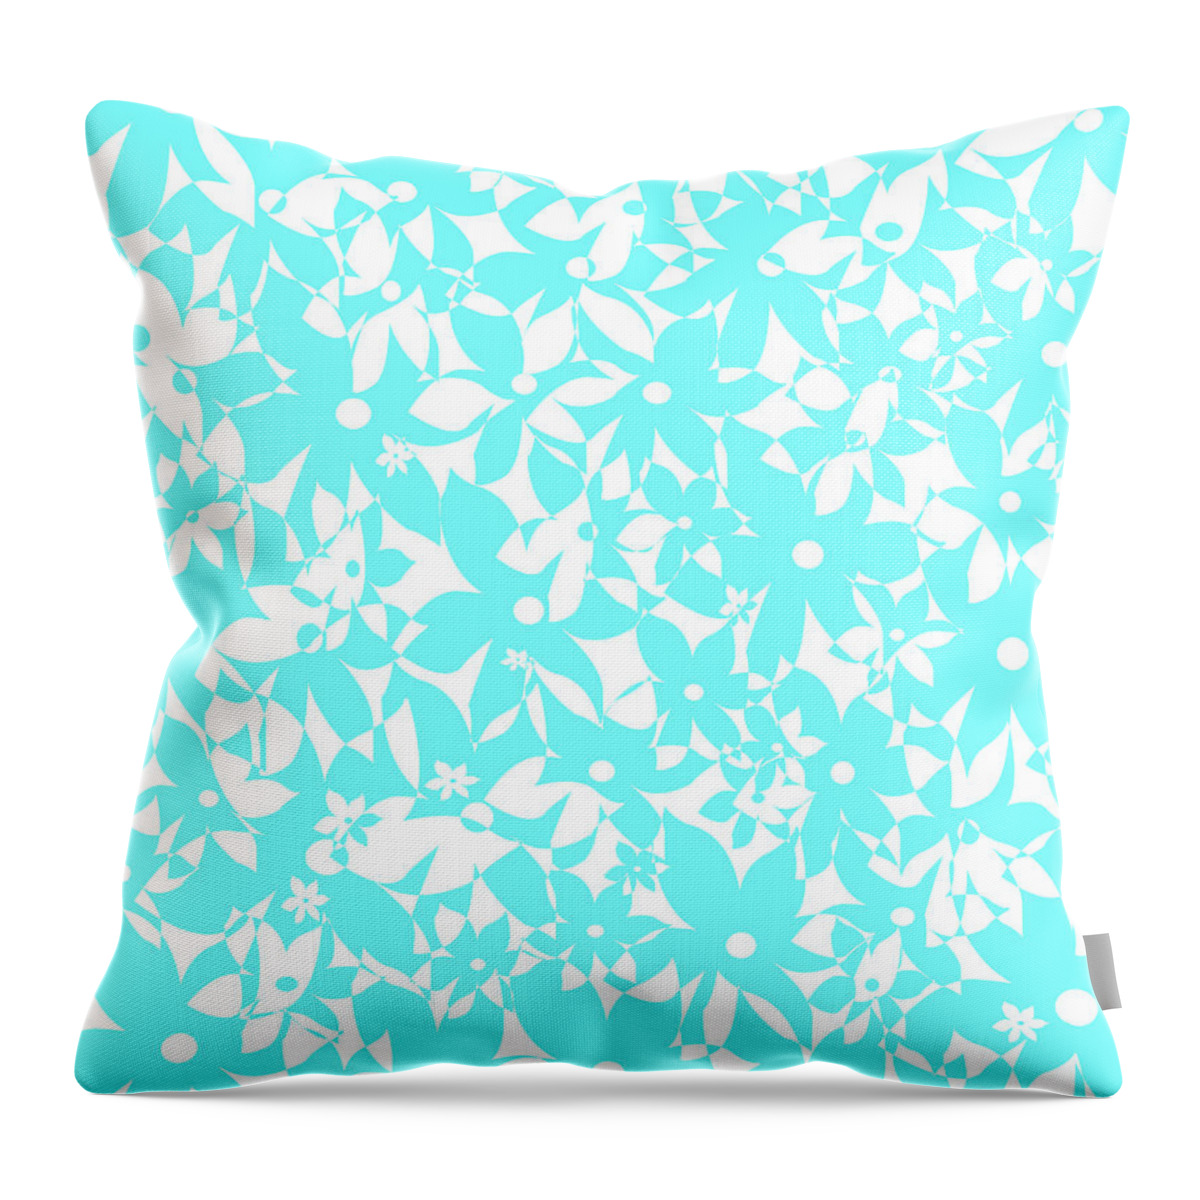 Flower Throw Pillow featuring the digital art Crowded Flowers - Turquoise by Shawna Rowe